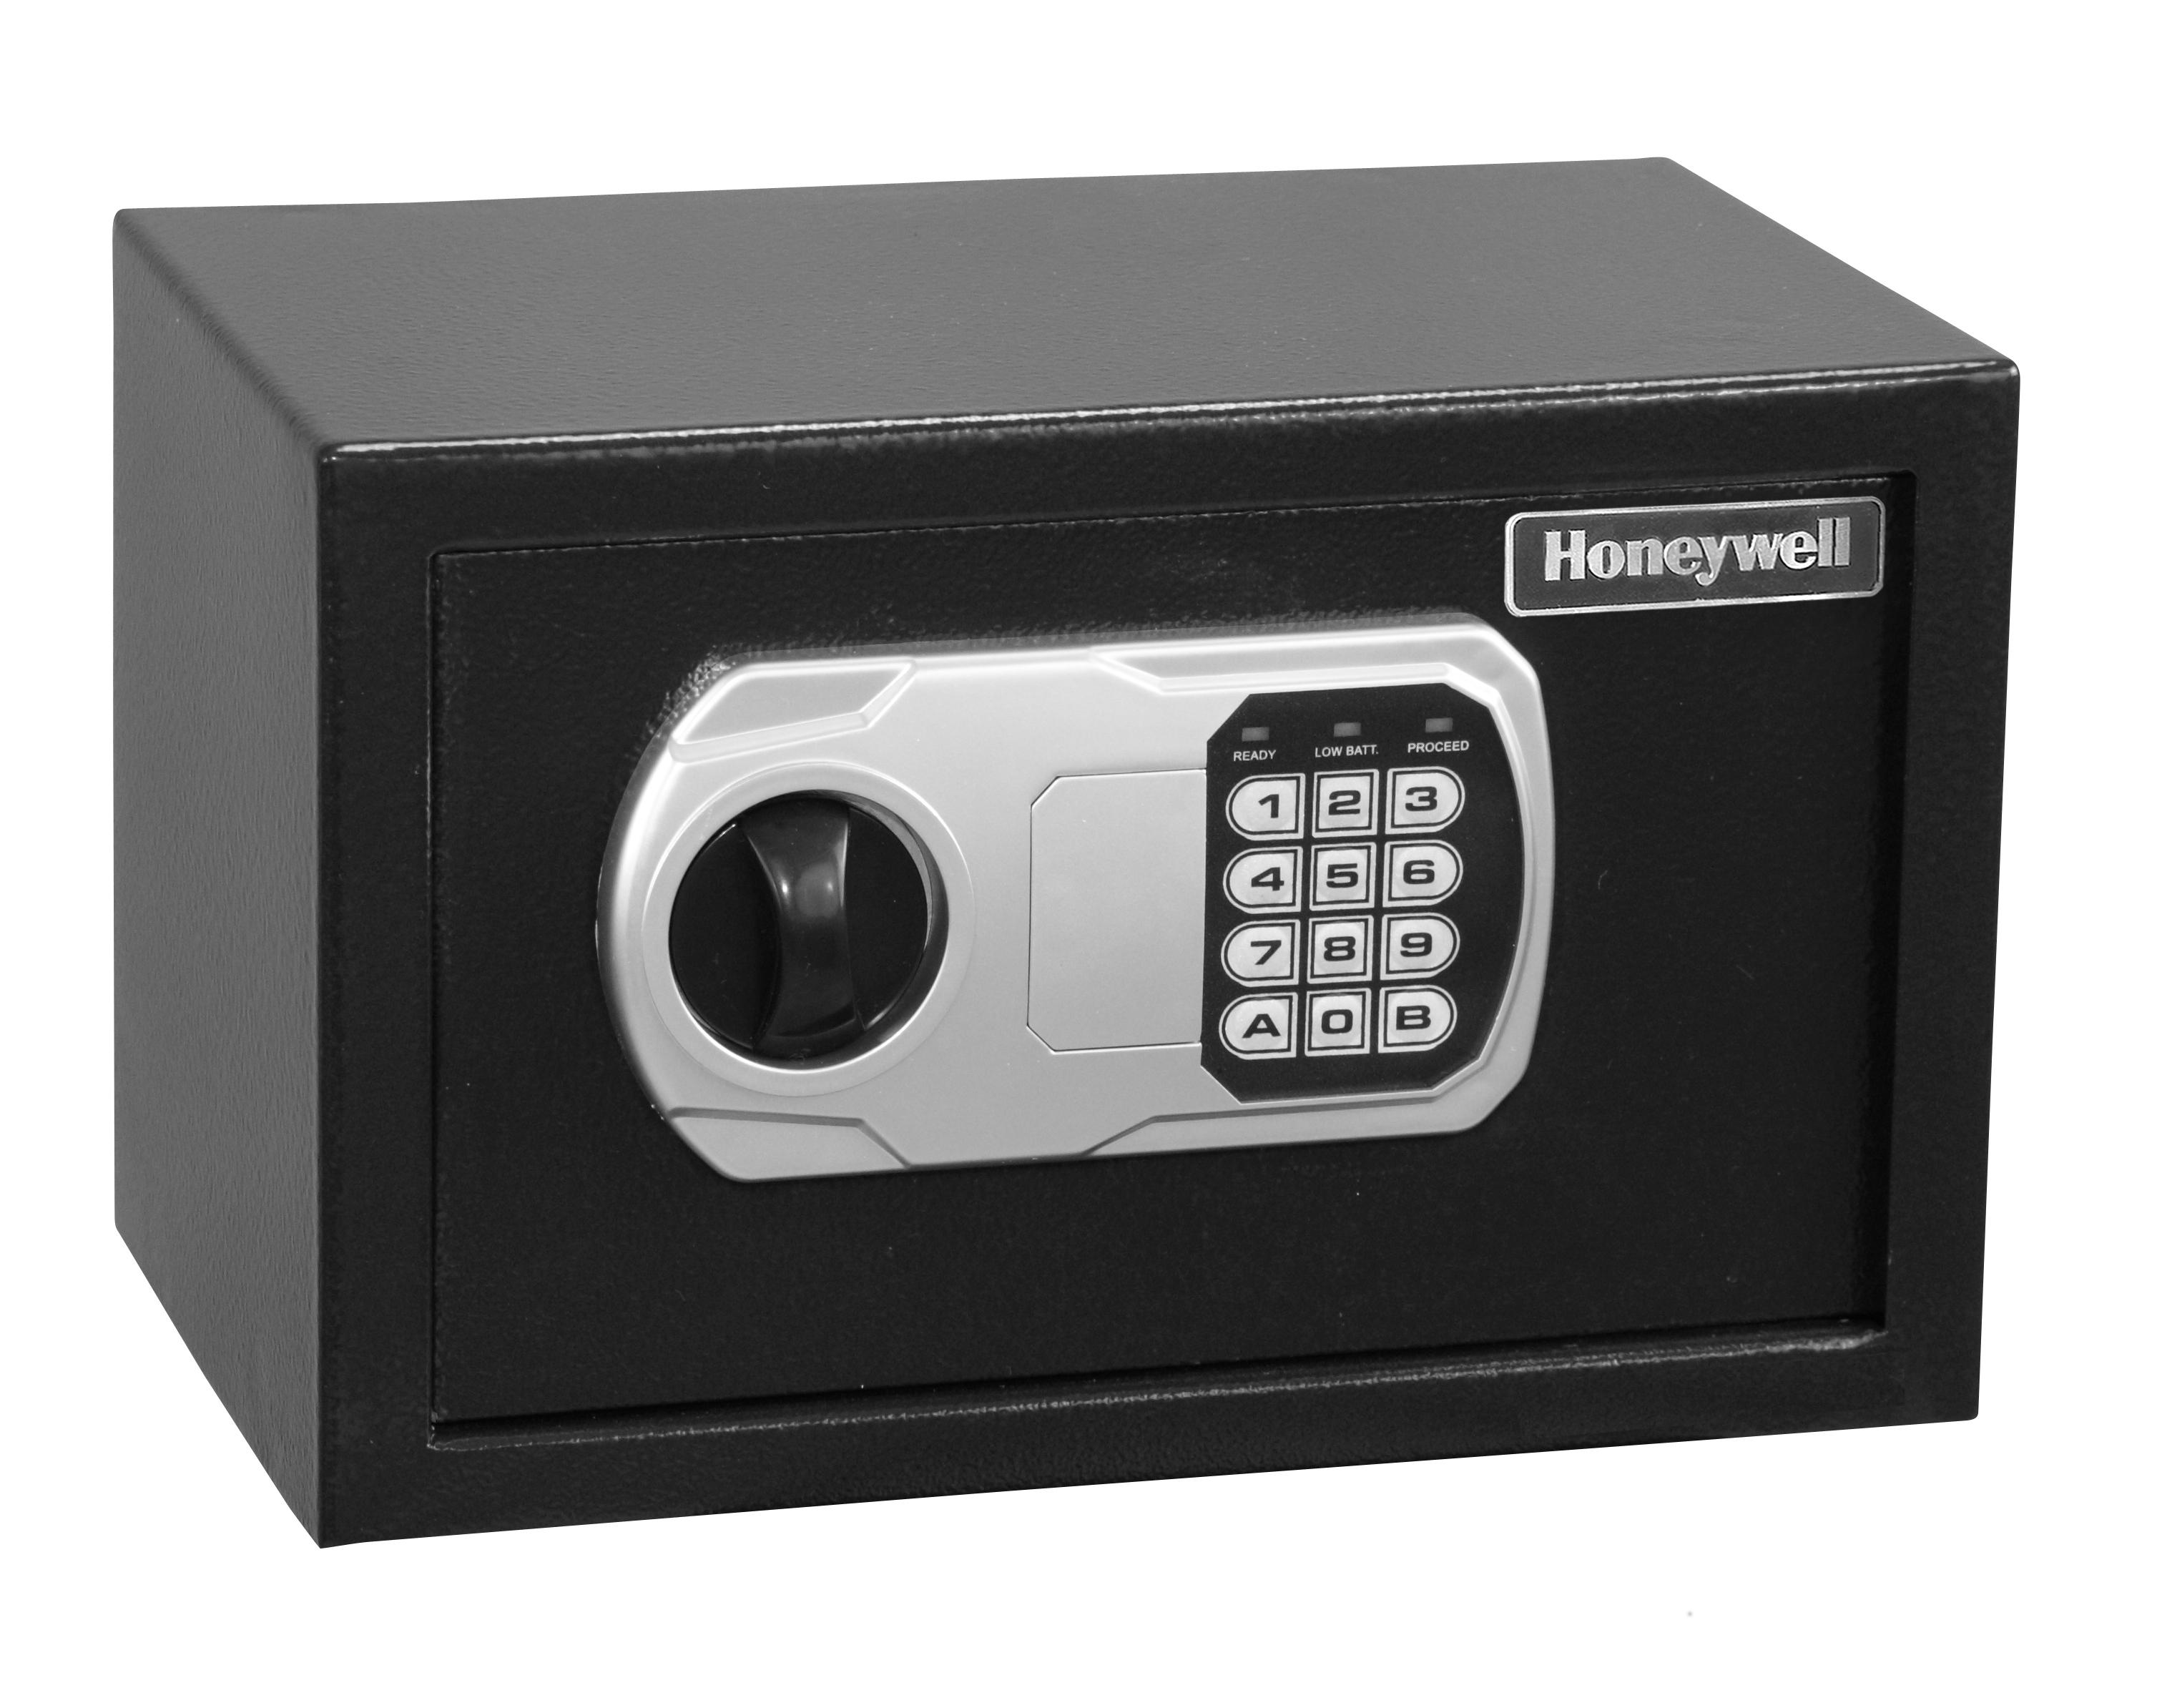 Amazon.com: Honeywell 5101DOJ Approved Small Security Safe with ...